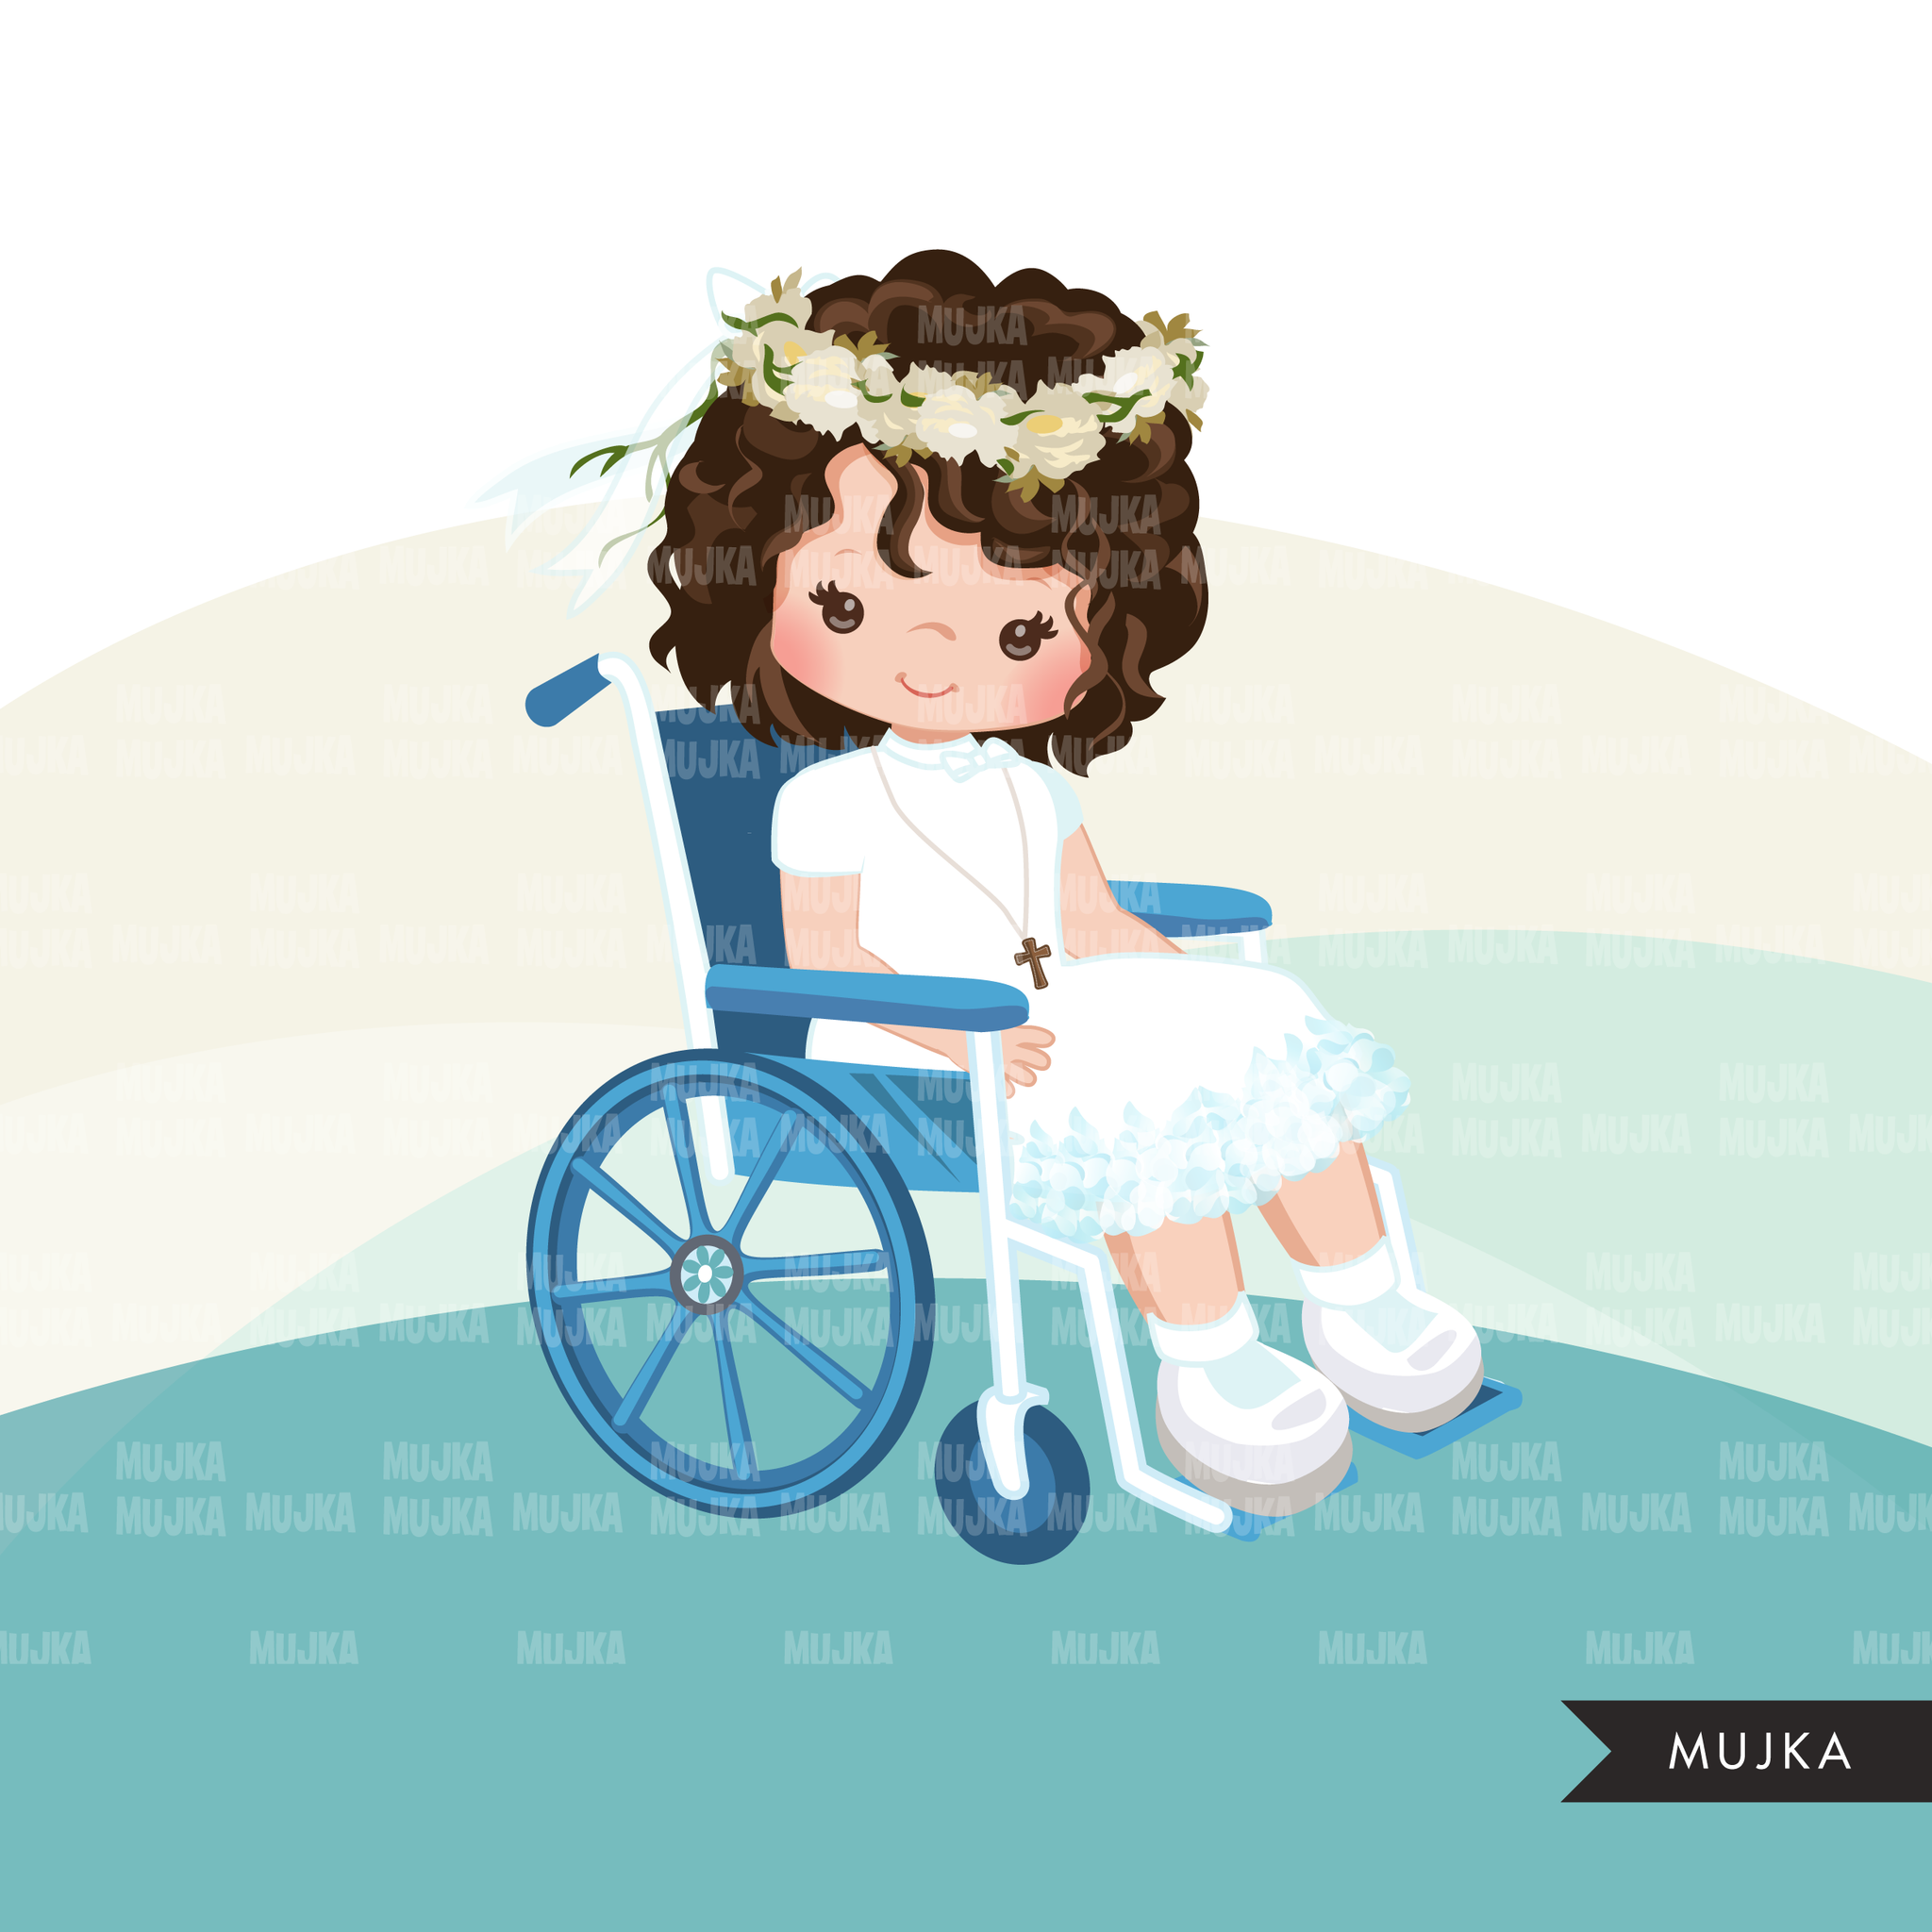 First Communion clipart, Special Needs designs, Wheelchair clipart, holy communion, girl png graphics, disable, religious, christian graphics